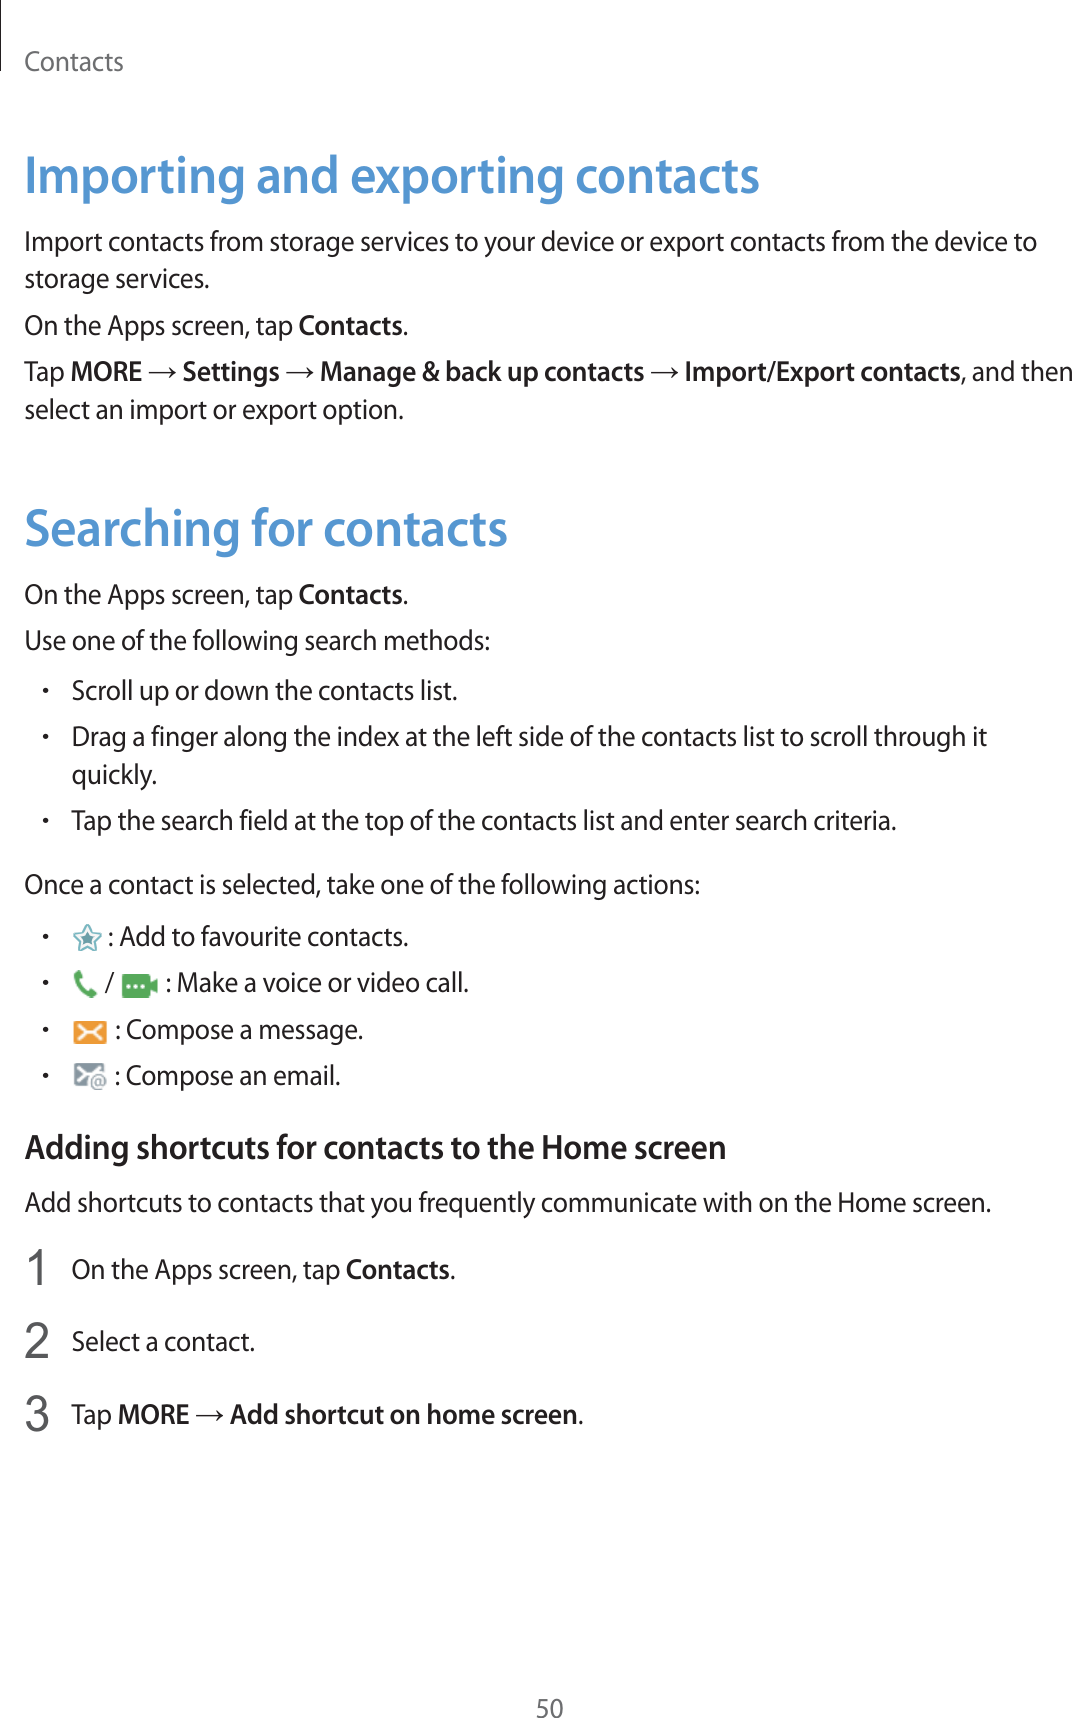 Contacts50Importing and exporting contactsImport contacts from storage services to your device or export contacts from the device to storage services.On the Apps screen, tap Contacts.Tap MORE ĺ Settings ĺ Manage &amp; back up contacts ĺ Import/Export contacts, and then select an import or export option.Searching for contactsOn the Apps screen, tap Contacts.Use one of the following search methods:rScroll up or down the contacts list.rDrag a finger along the index at the left side of the contacts list to scroll through it quickly.rTap the search field at the top of the contacts list and enter search criteria.Once a contact is selected, take one of the following actions:r : Add to favourite contacts.r /   : Make a voice or video call.r : Compose a message.r : Compose an email.Adding shortcuts for contacts to the Home screenAdd shortcuts to contacts that you frequently communicate with on the Home screen.1On the Apps screen, tap Contacts.2Select a contact.3Tap MORE ĺ Add shortcut on home screen.